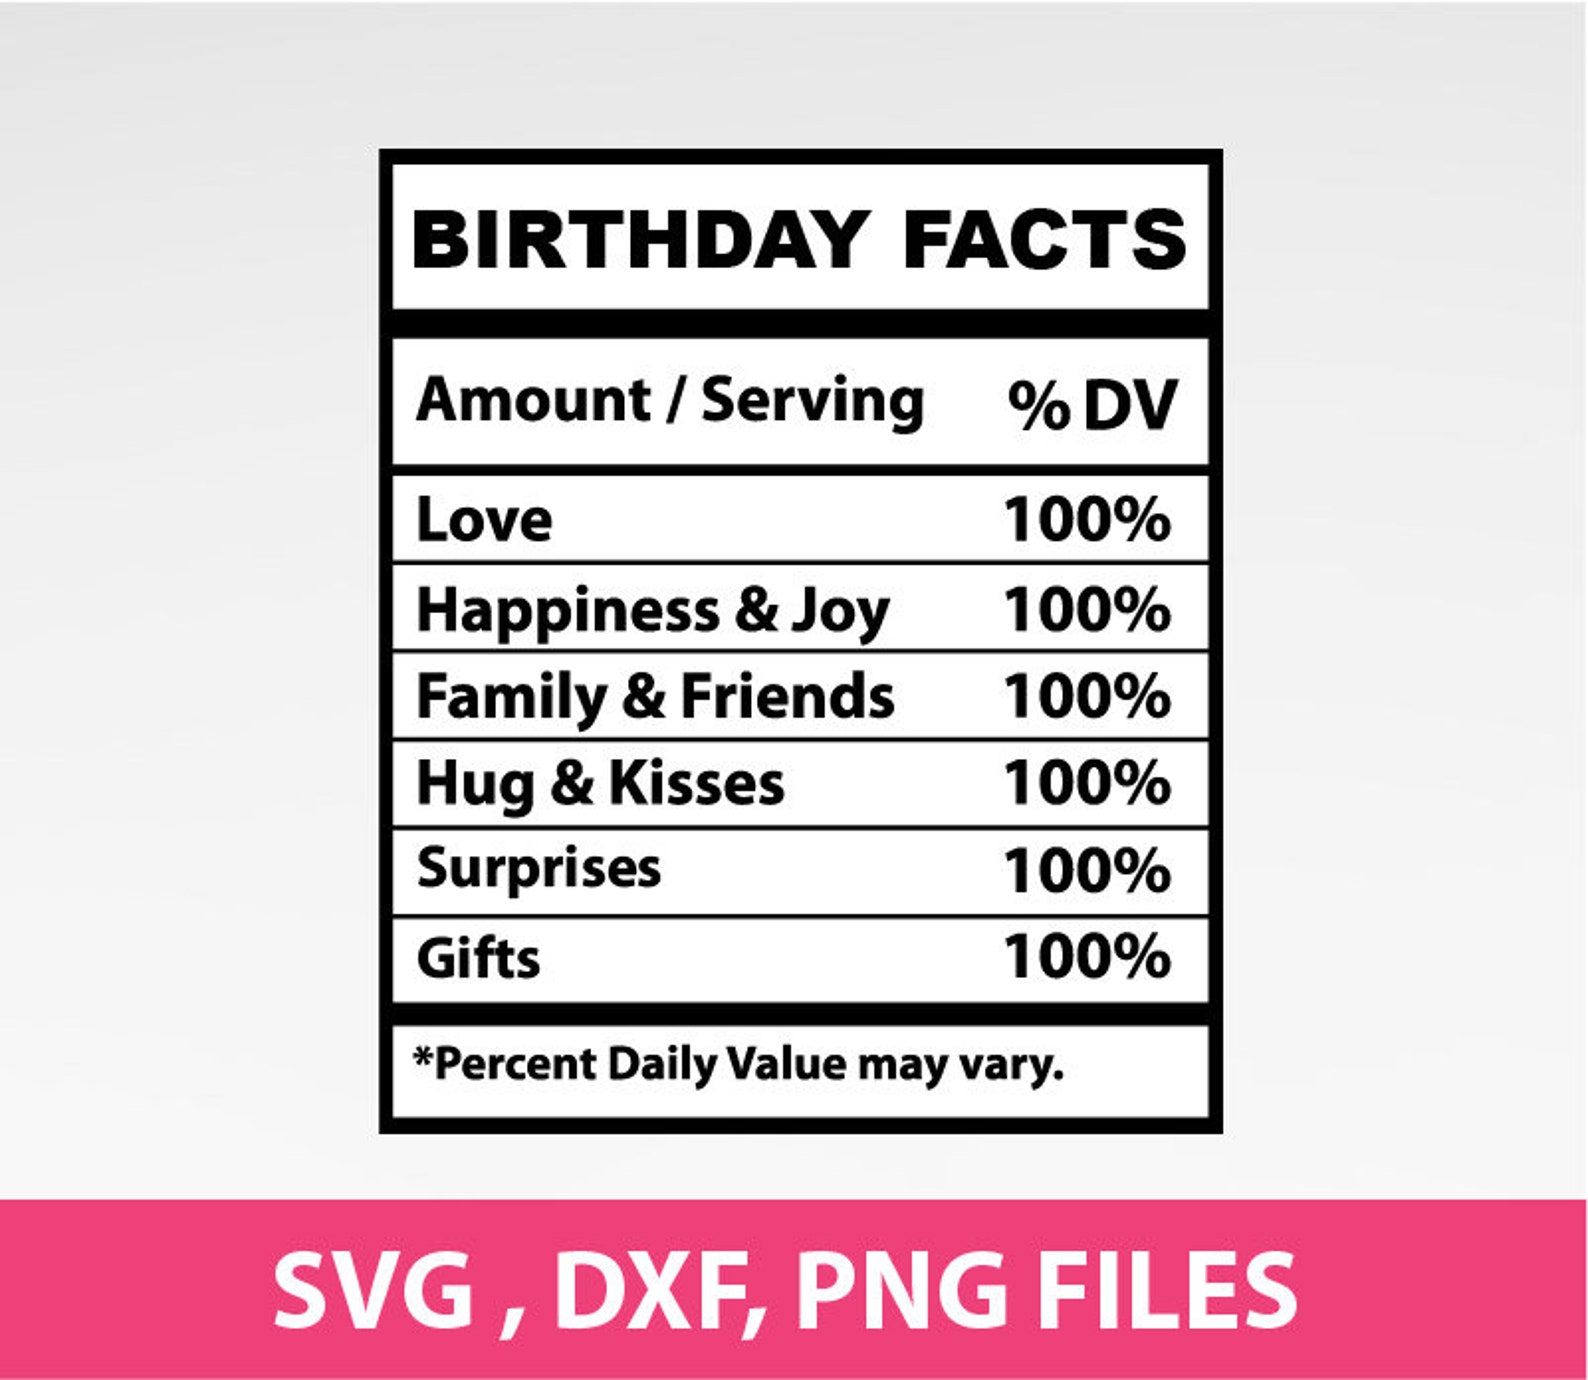 Birthday Facts Nutrition Facts PNG and SVG Dxf 206 image 0.